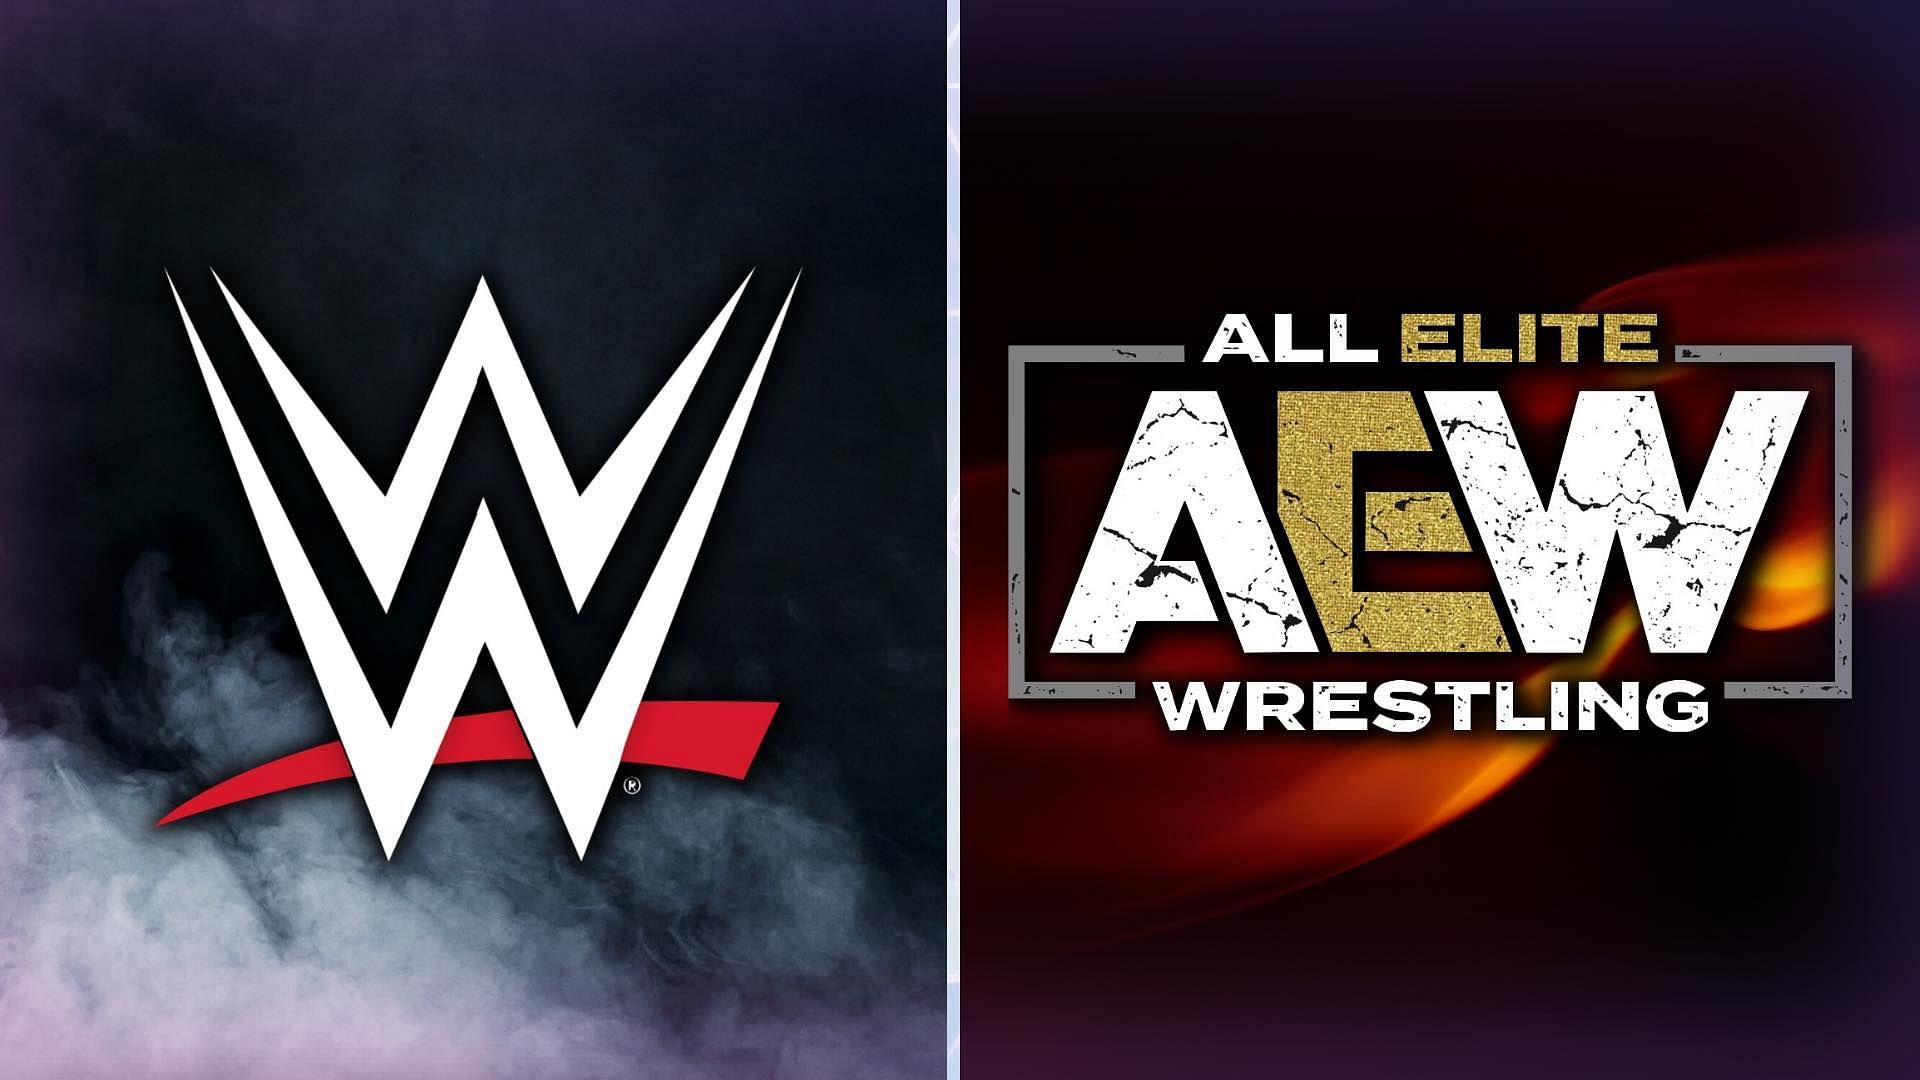 WWE and the rival wrestling promotion AEW.